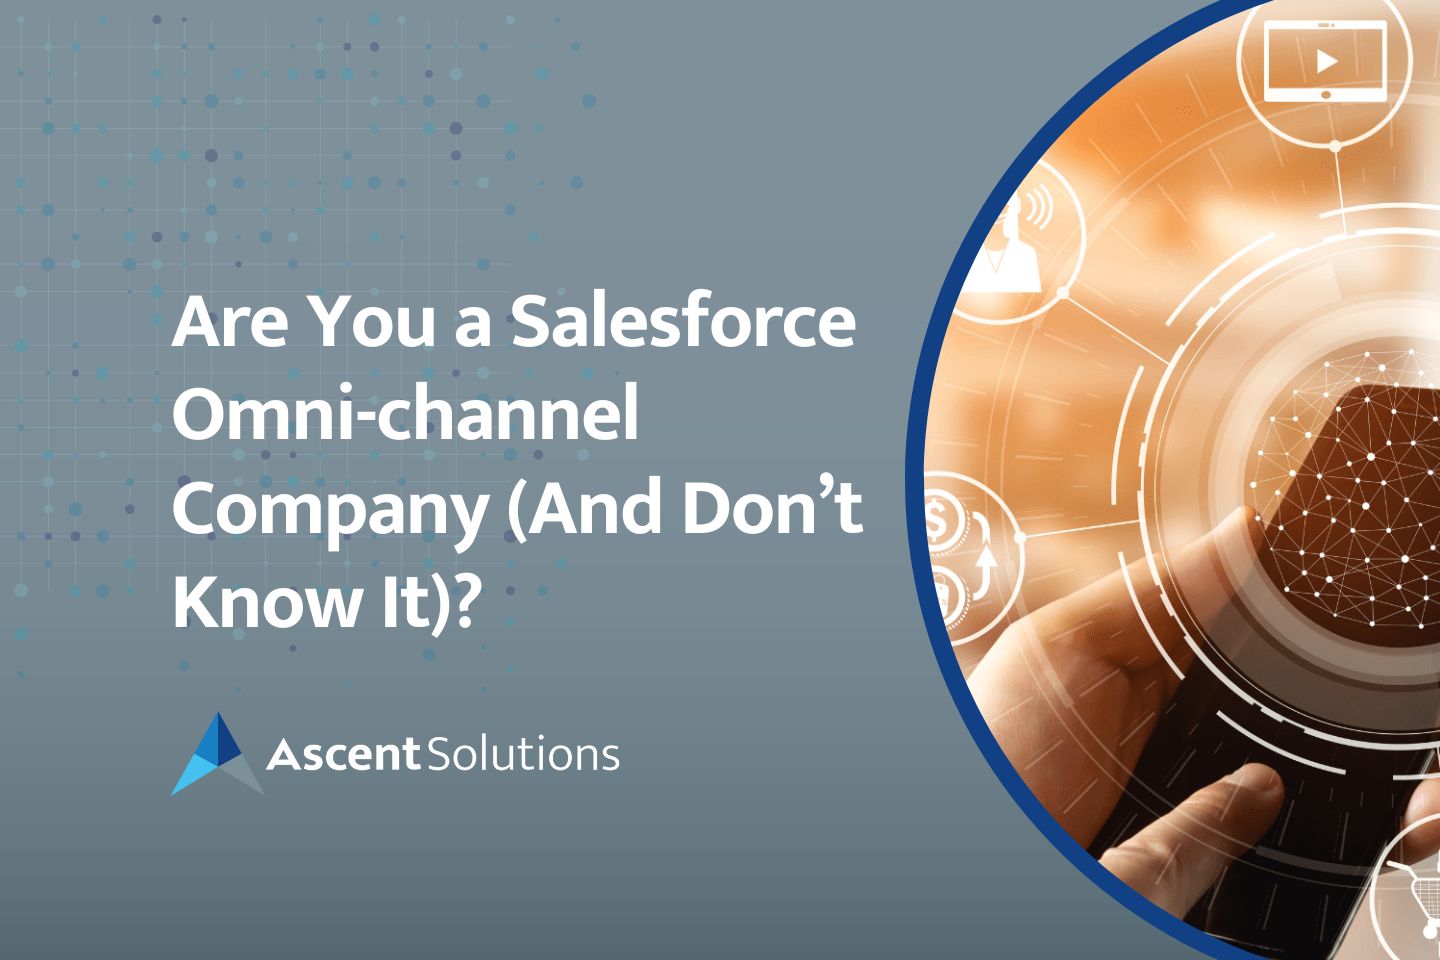 Are You a Salesforce Omni-channel Company And Don’t Know It